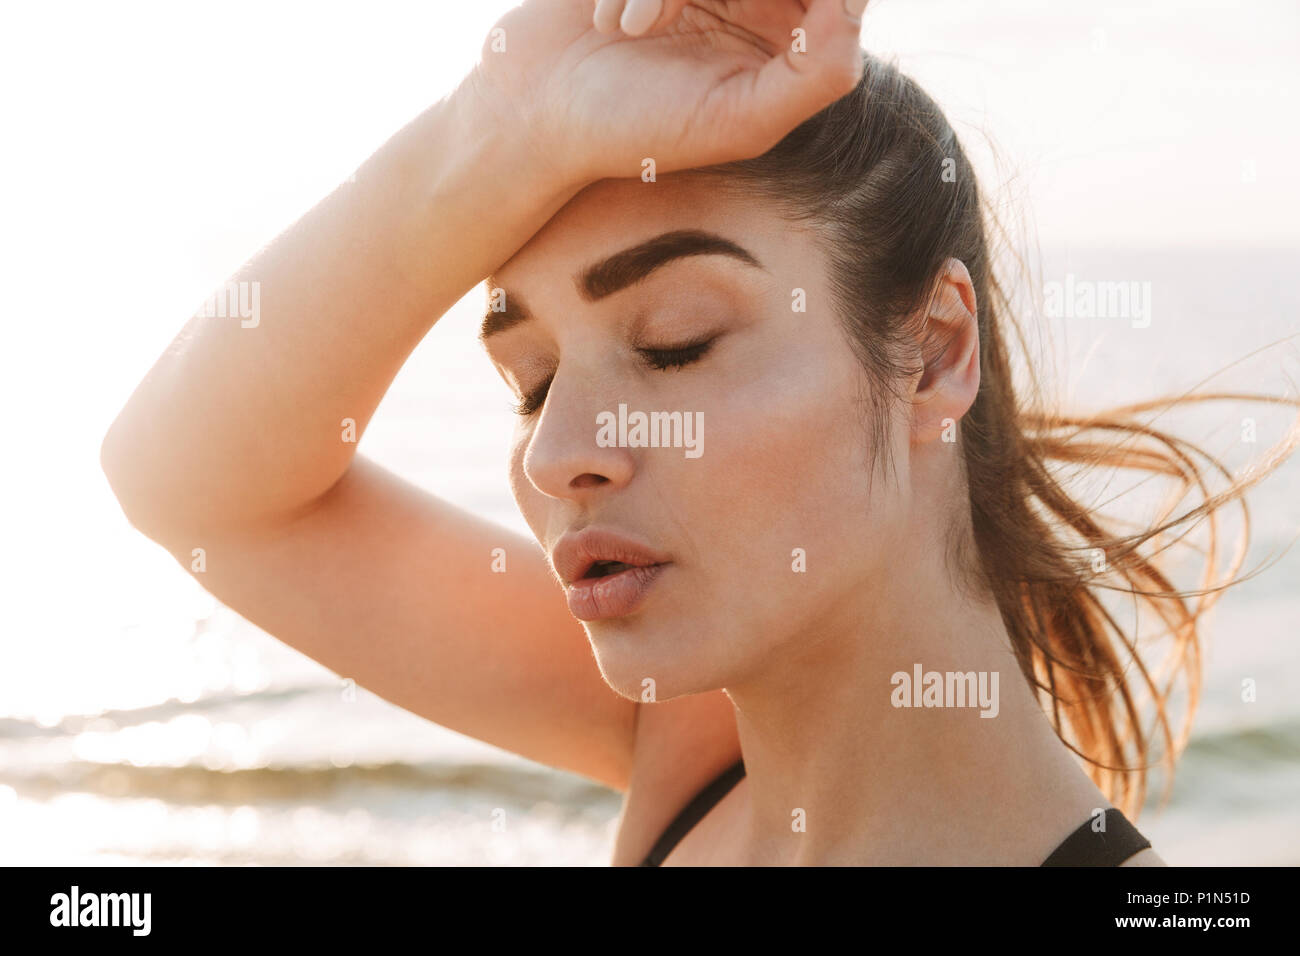 Close up portrait of an exhausted young sportswoman wiping forehead with her hand at the beach Stock Photo